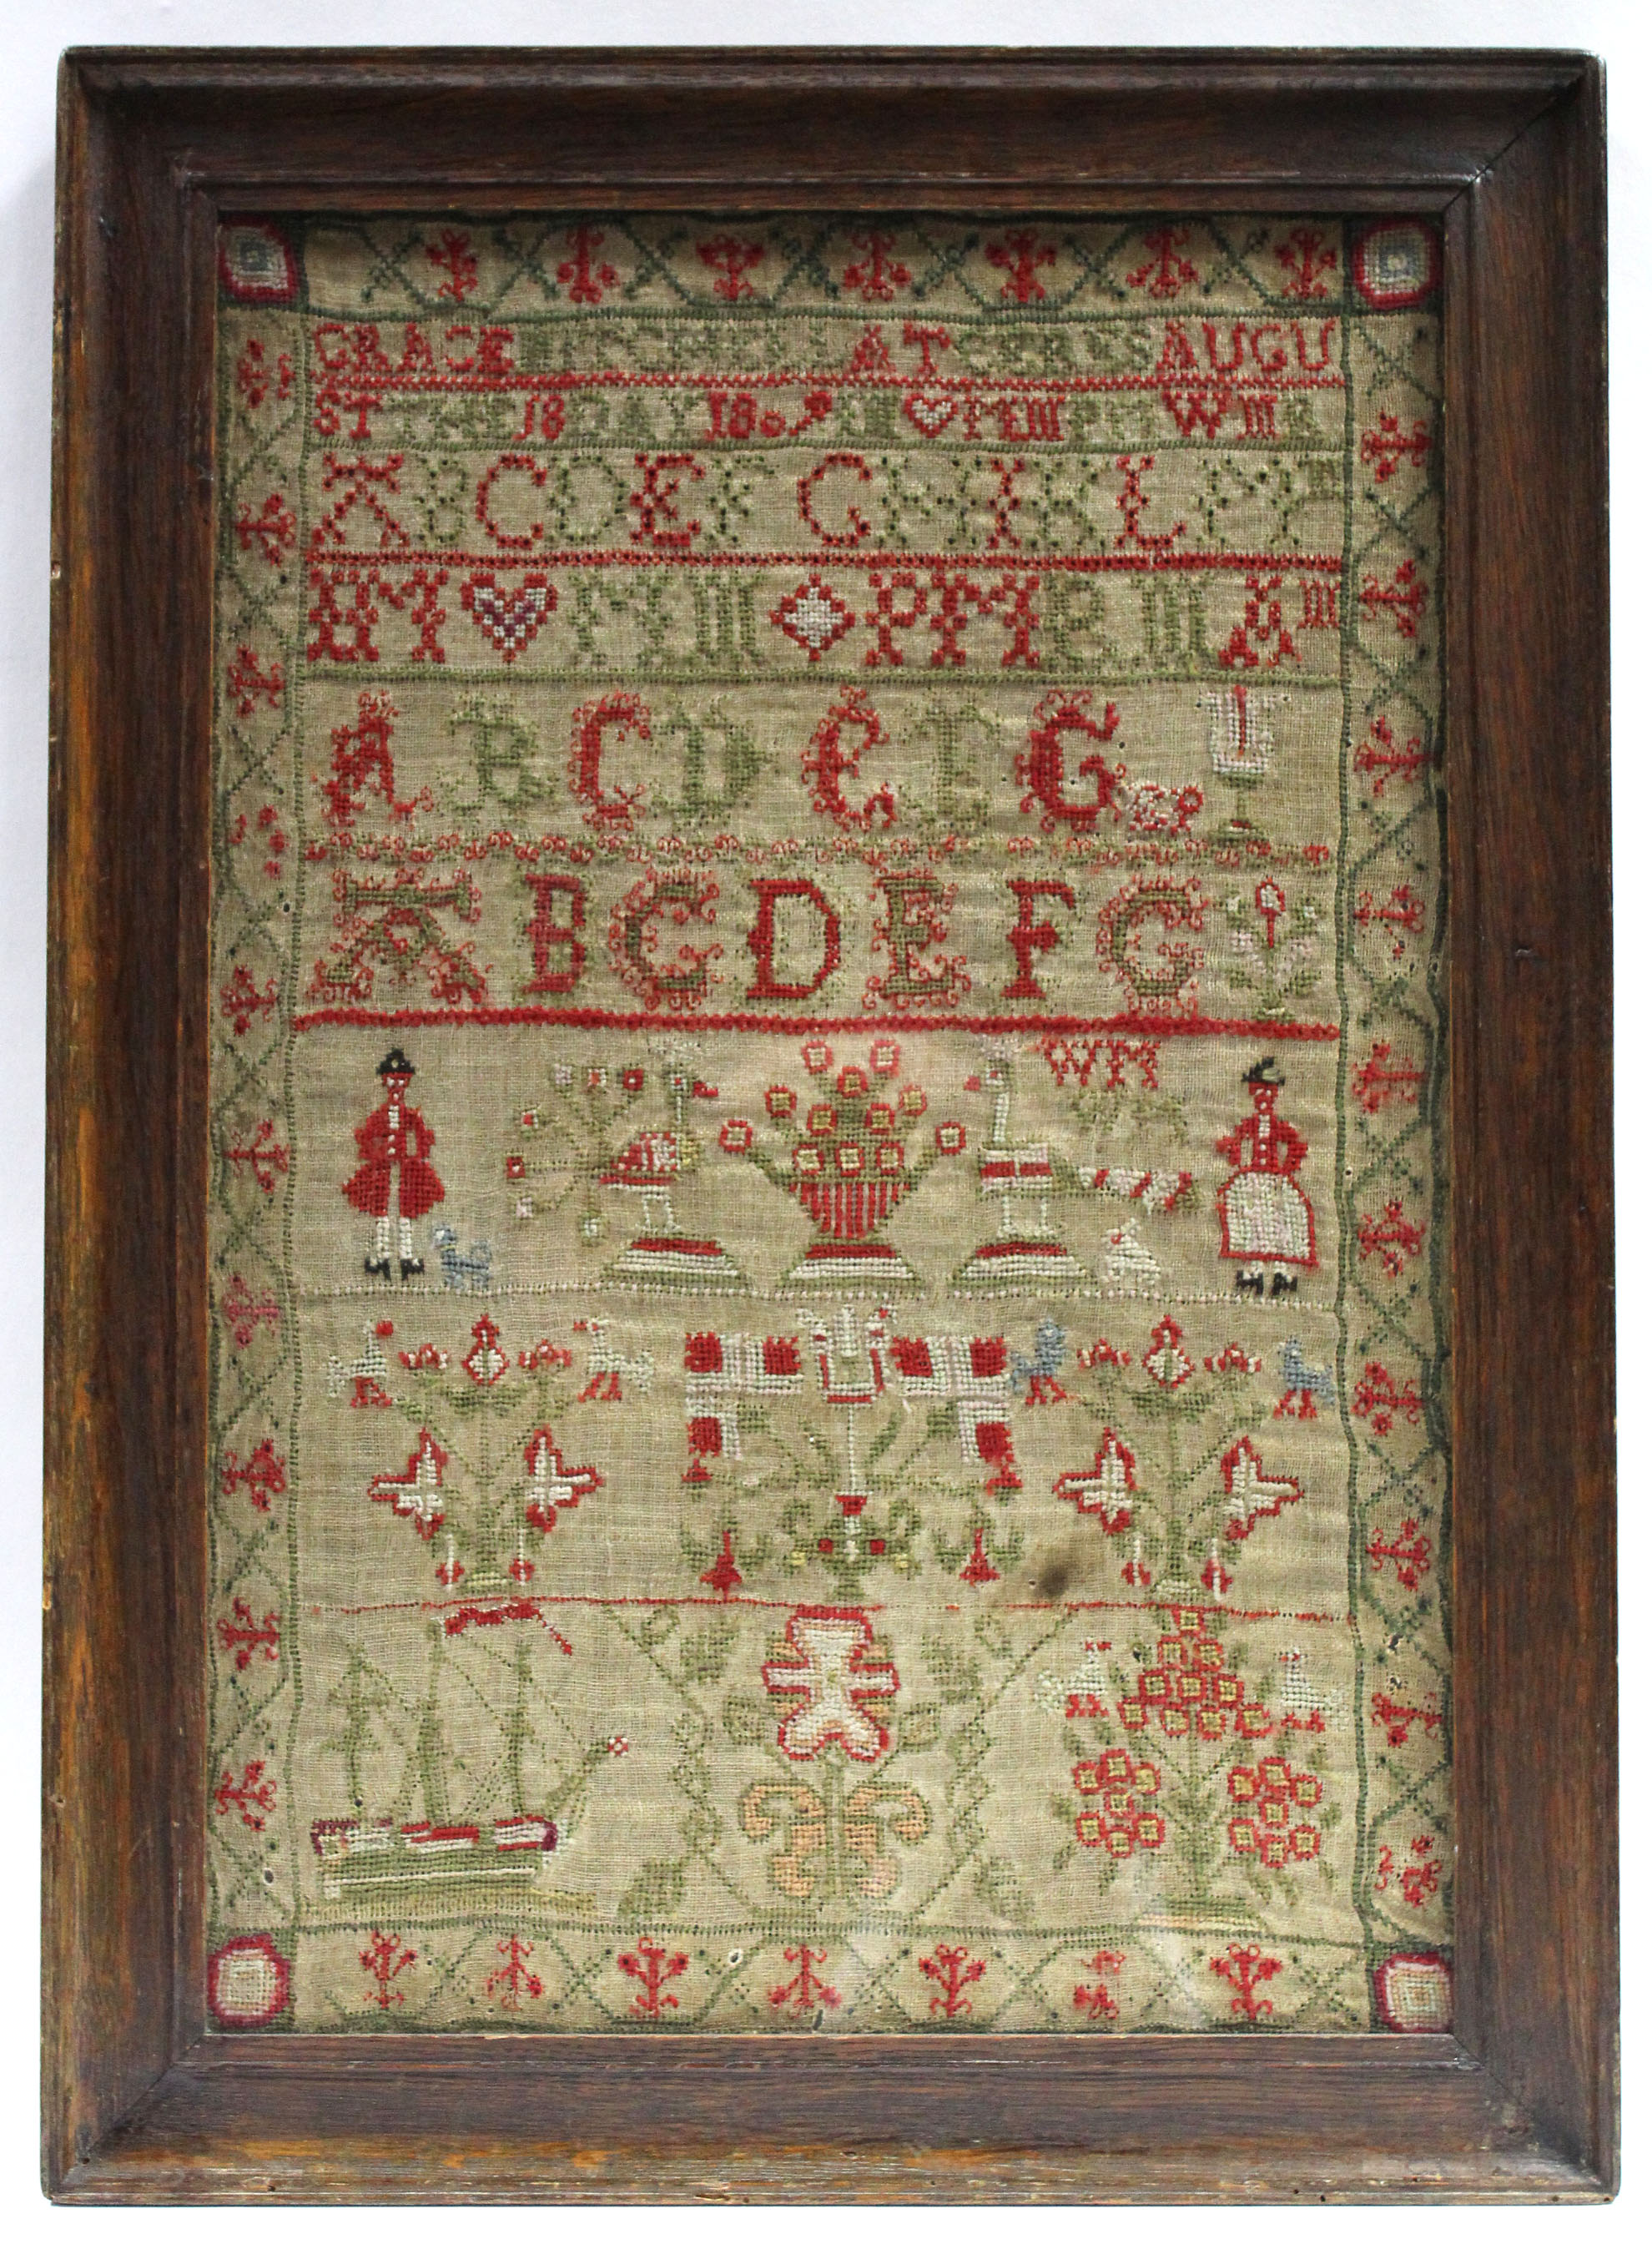 A George III needlework sampler inscribed, “Grace Mitchel at Ceres, August The 18 Day, 1809”, with